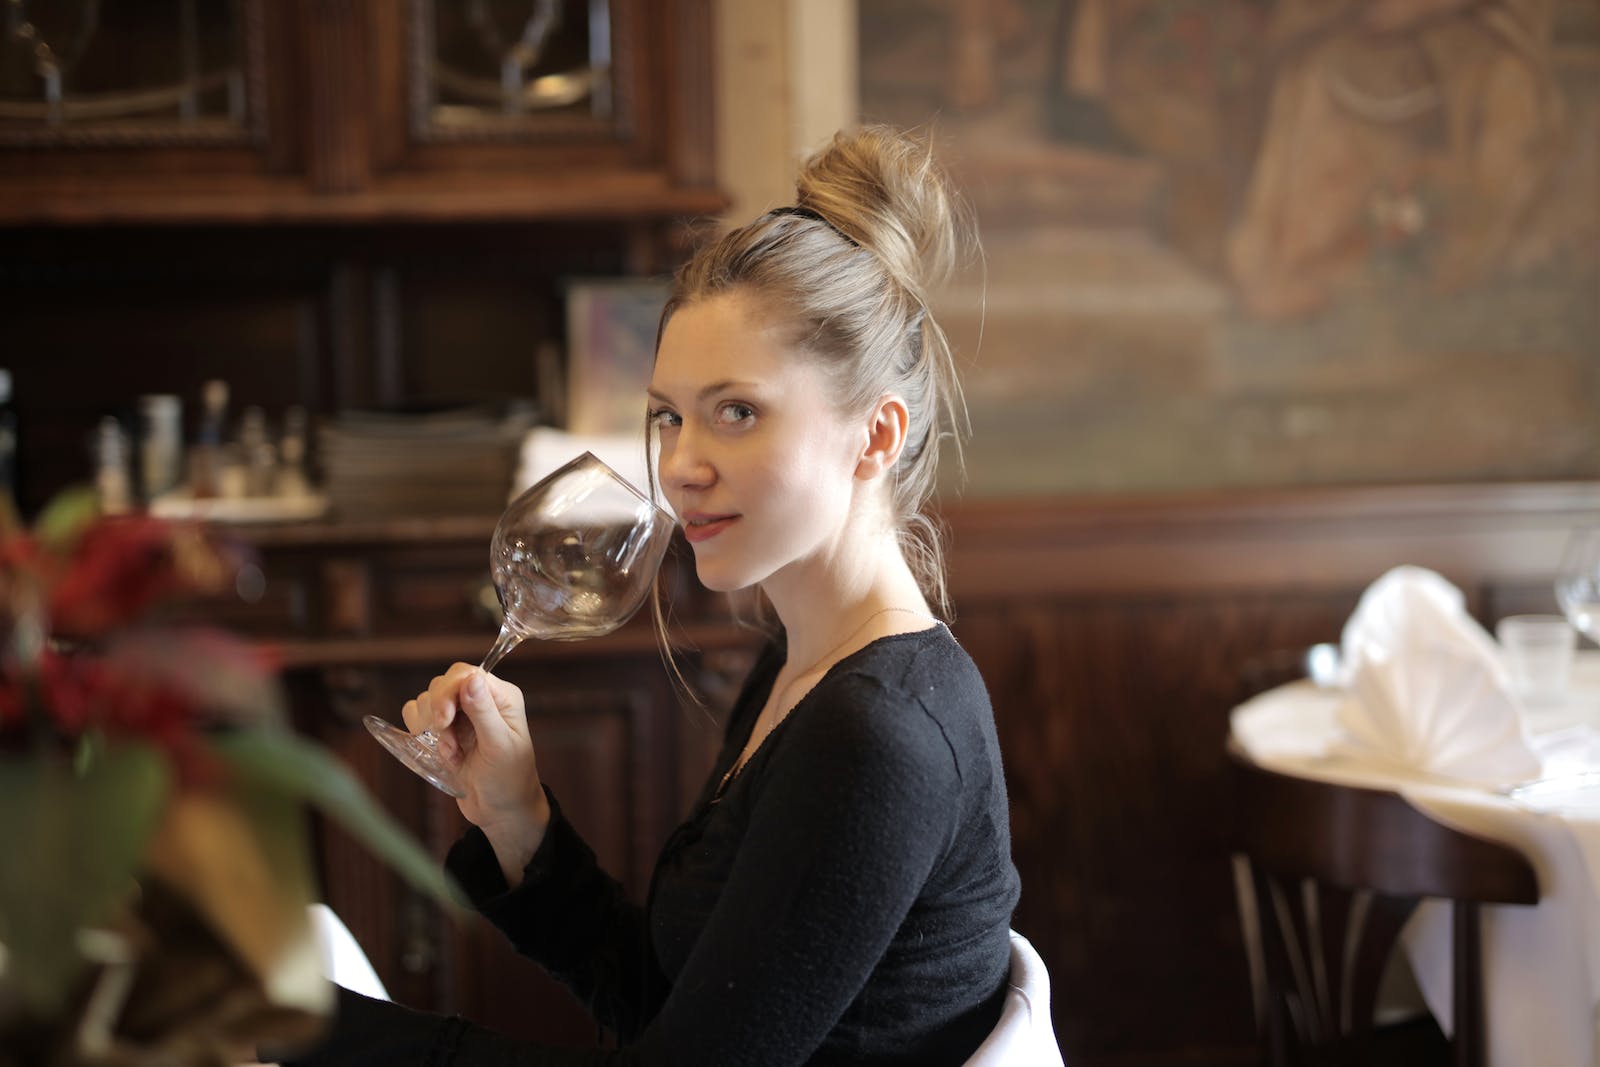 Blond Hair Woman in Black Long Sleeves Holding Wine Glass